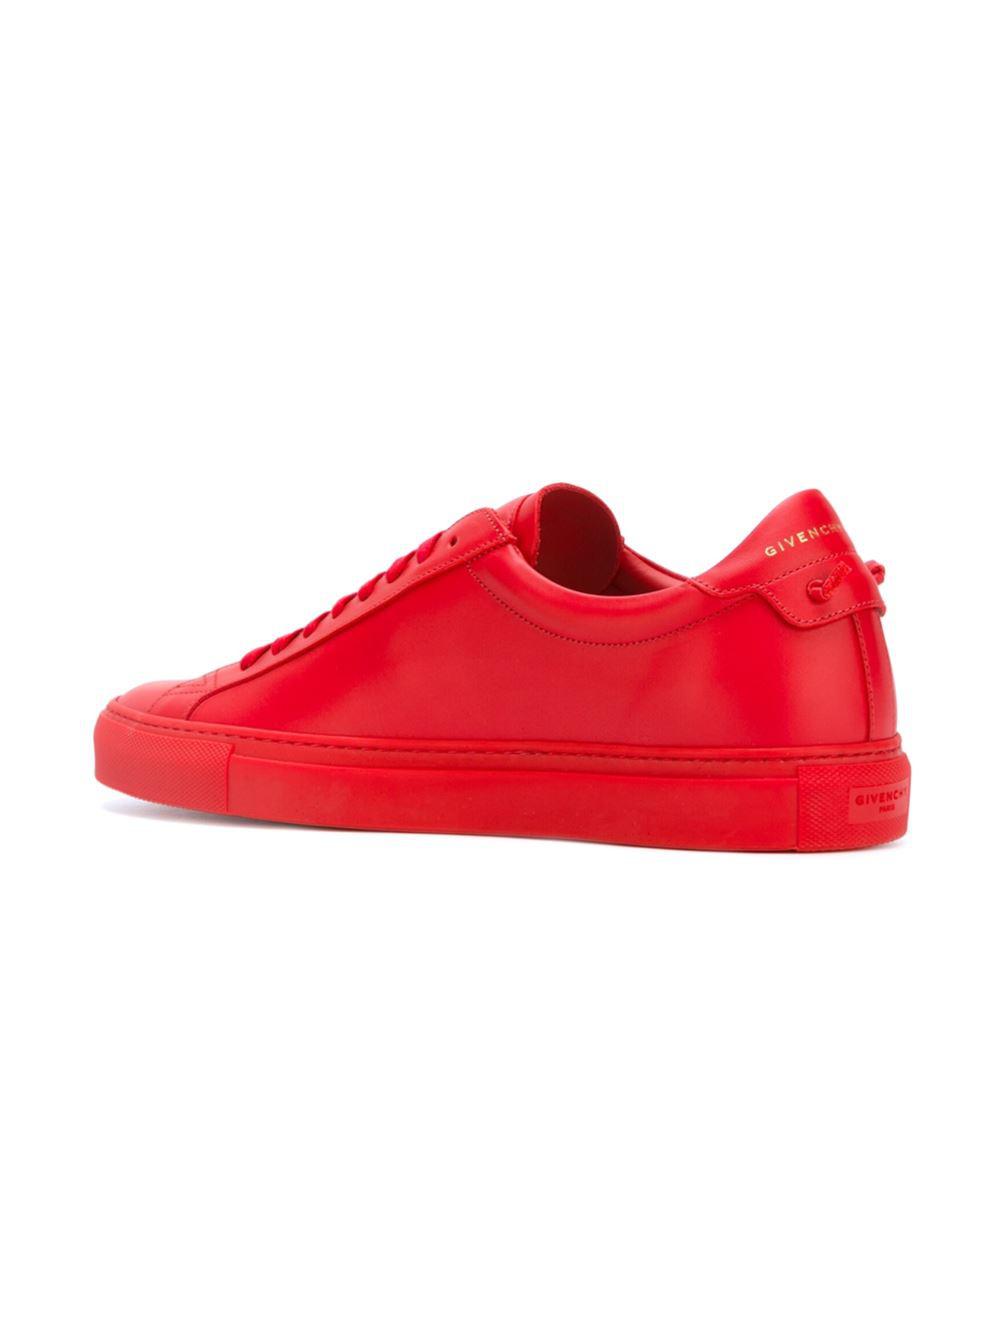 Lyst - Givenchy Classic Low-top Sneakers in Red for Men